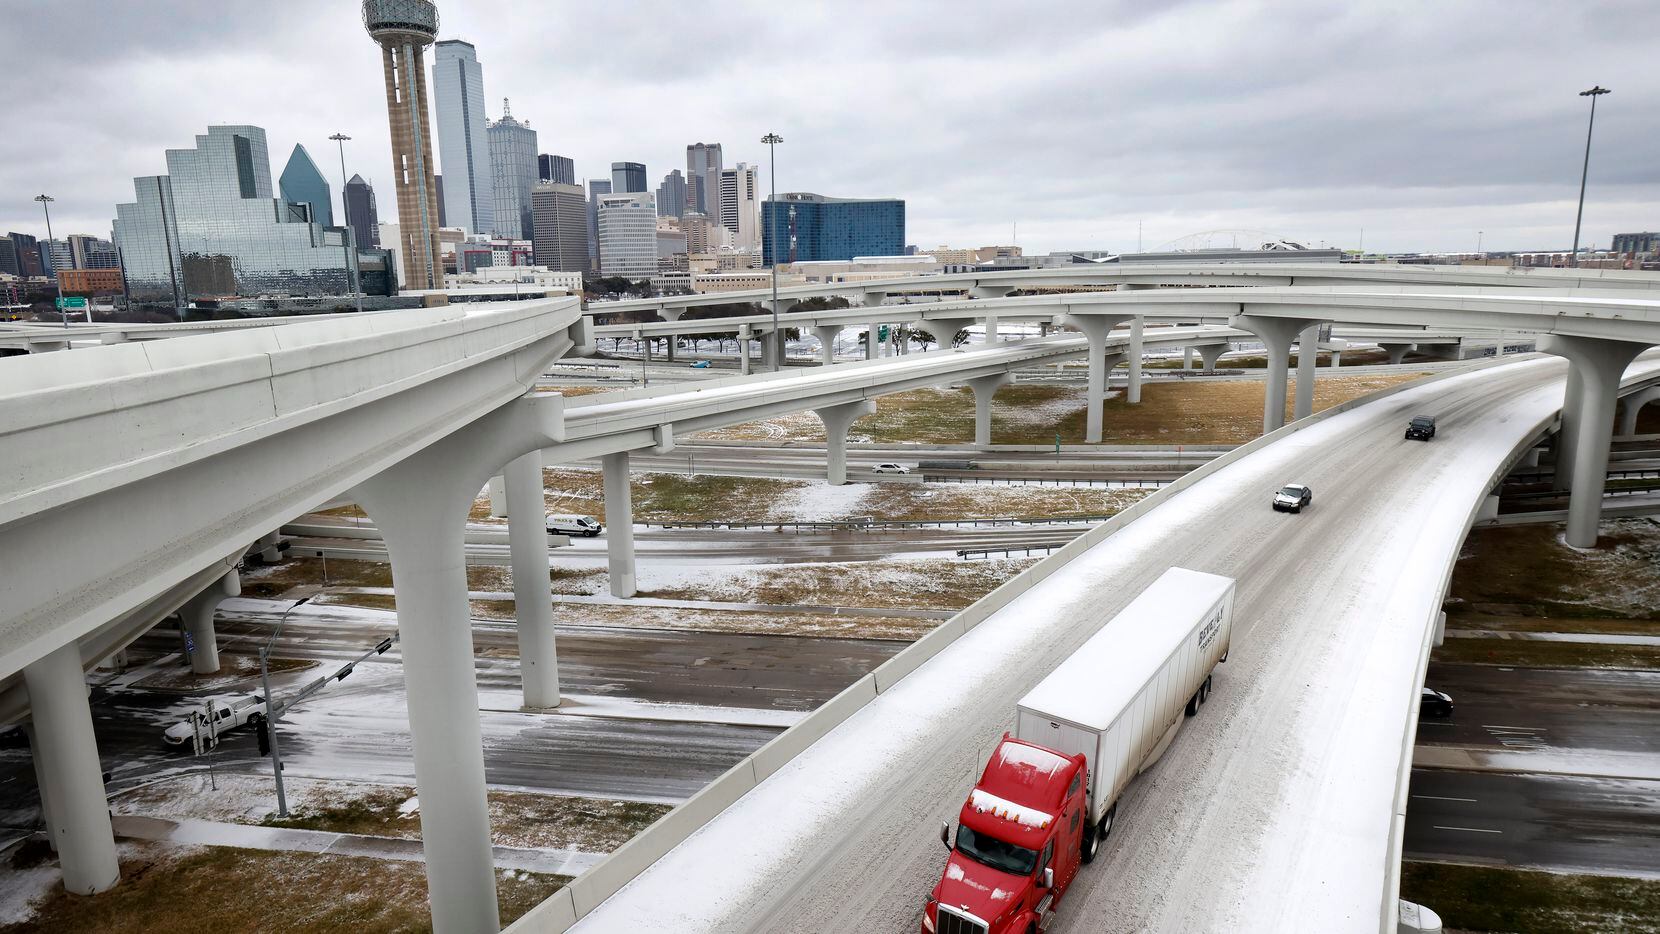 Traffic moves slowly across bridges comprising the Mix Master interchange in downtown Dallas...